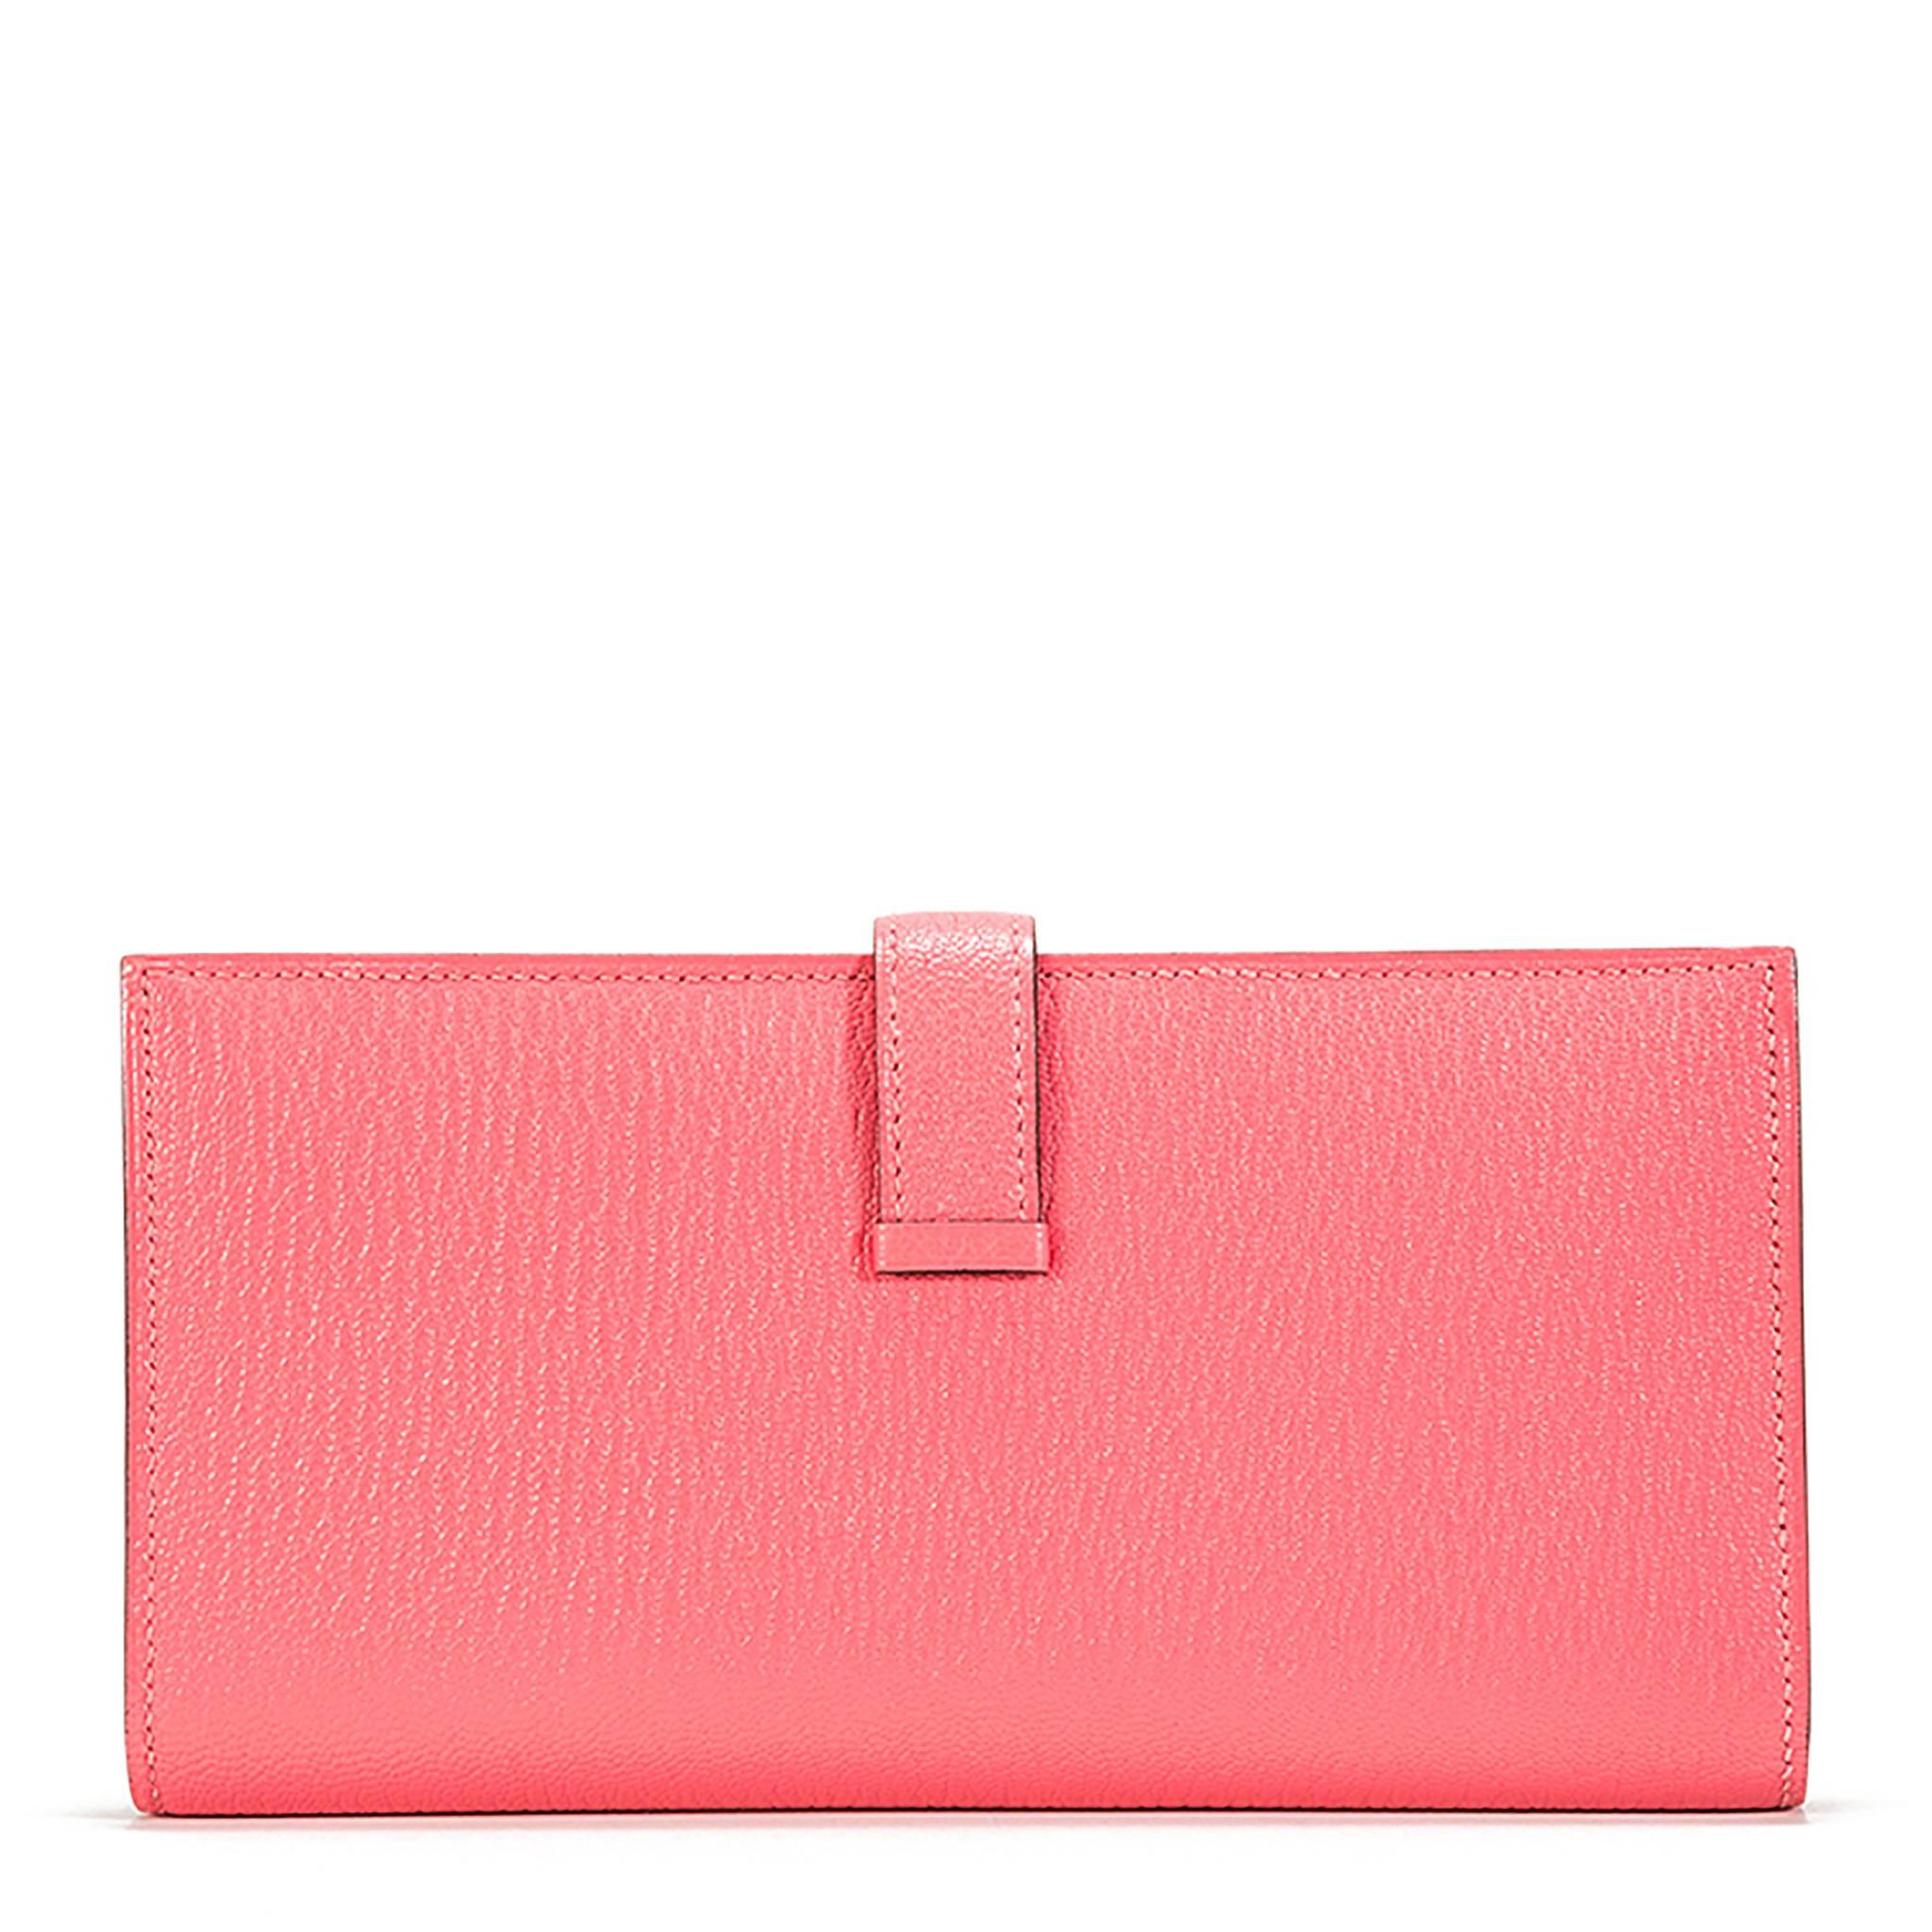 Hermes "Bearn" Wallet Epsom Leather Pink Color PHW

Pristine condition. Pre-owned and never used

Model: Bearn

Composition: Epsom

Color: Pink

Hardware: Palladium

Stamp: X

Measures: 6.88 H inch X 3.74 inch D / 17.5 cm H x 9.5 cm